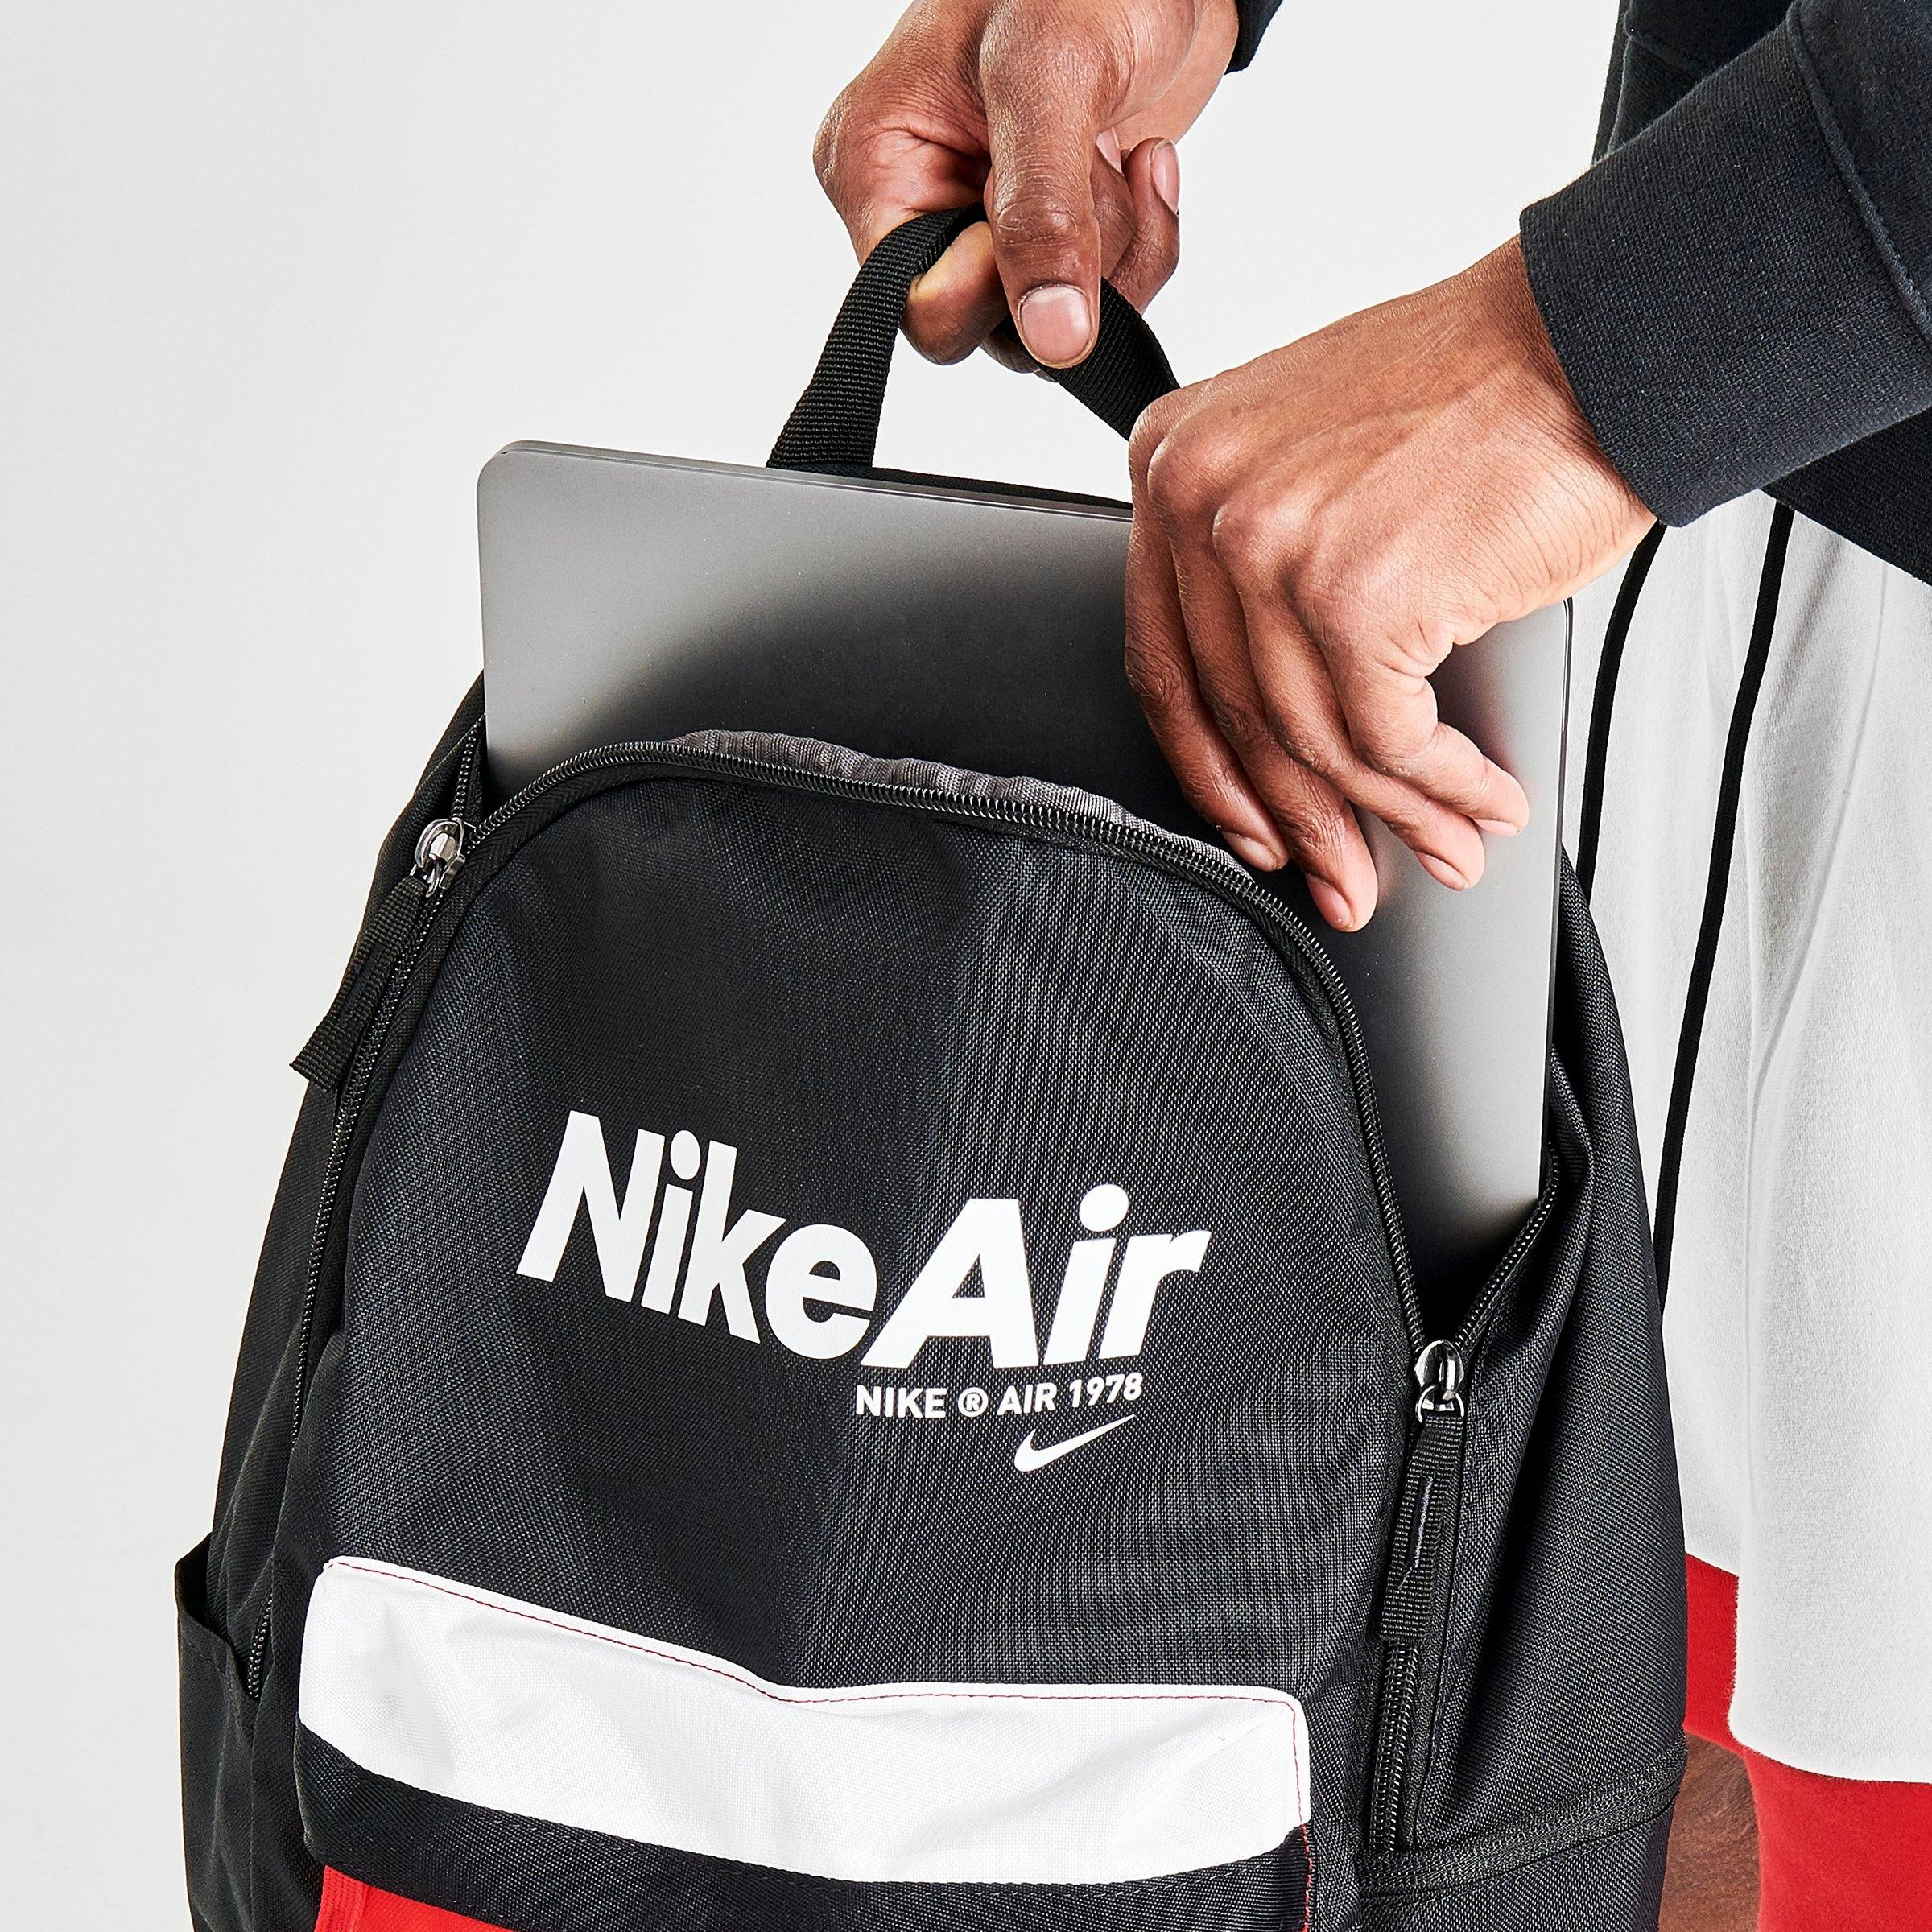 nike air backpack black and red